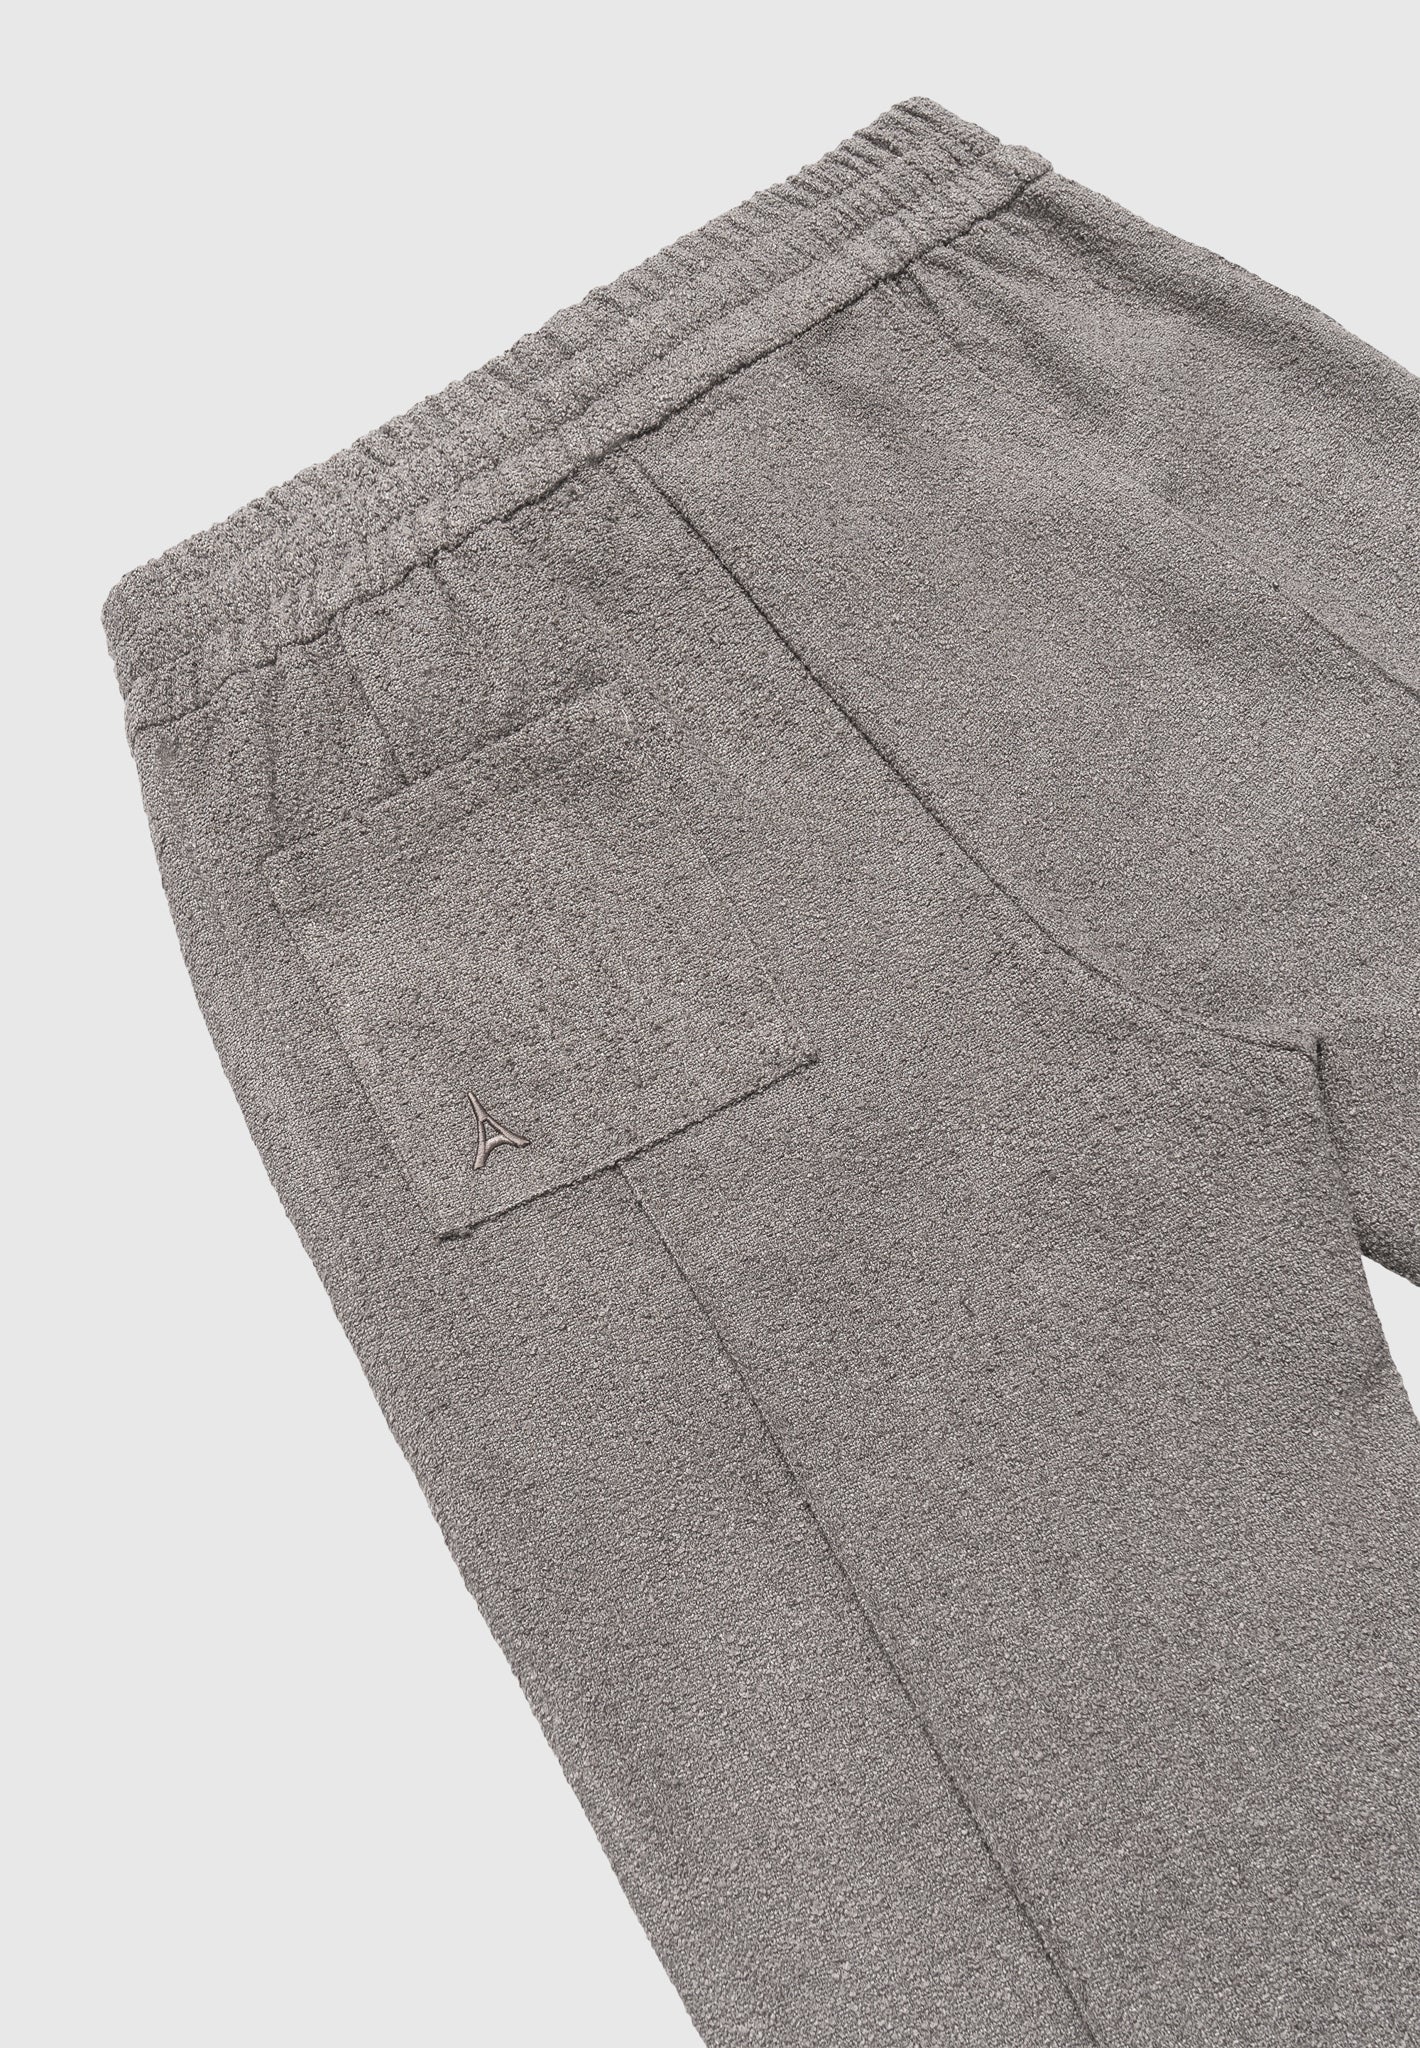 boucle-pintuck-tapered-trousers-charcoal